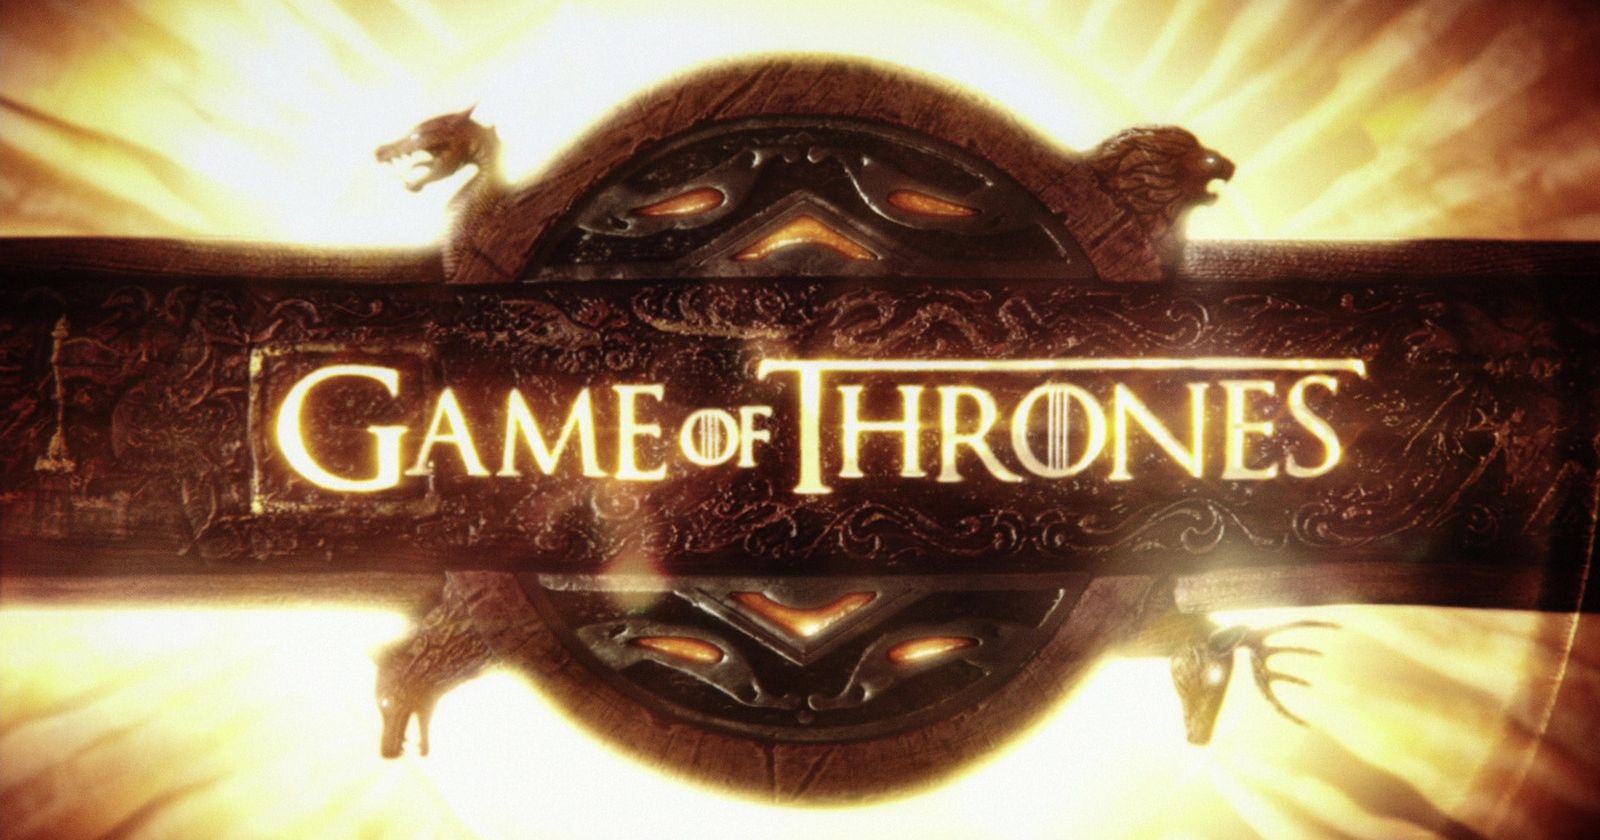 Where Was Game of Thrones Filmed - Opening Title